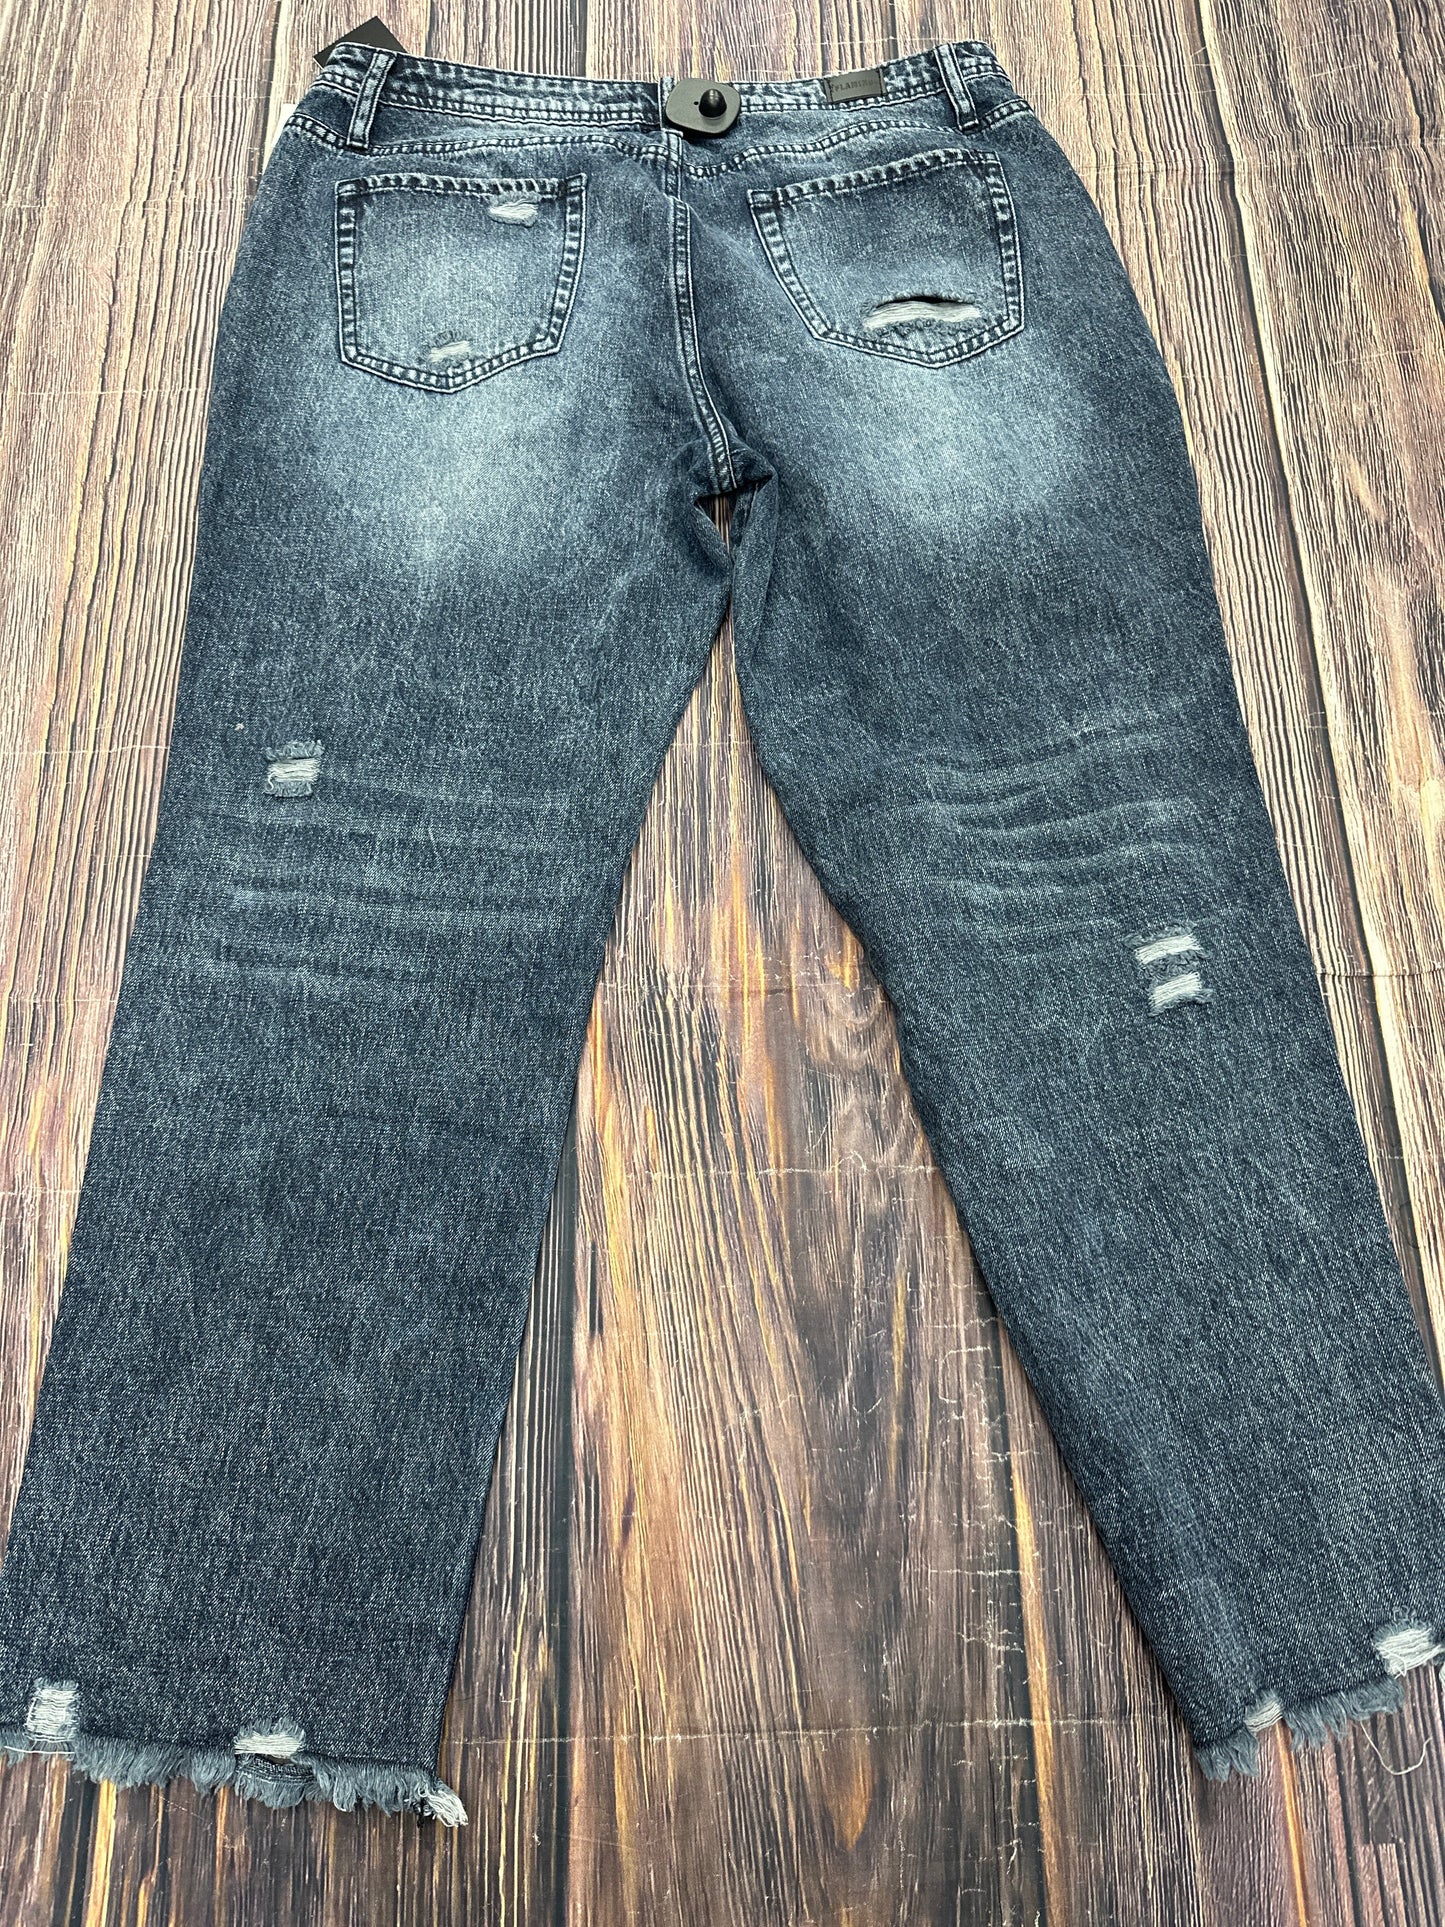 Jeans Straight By Flamingo Urban  Size: L